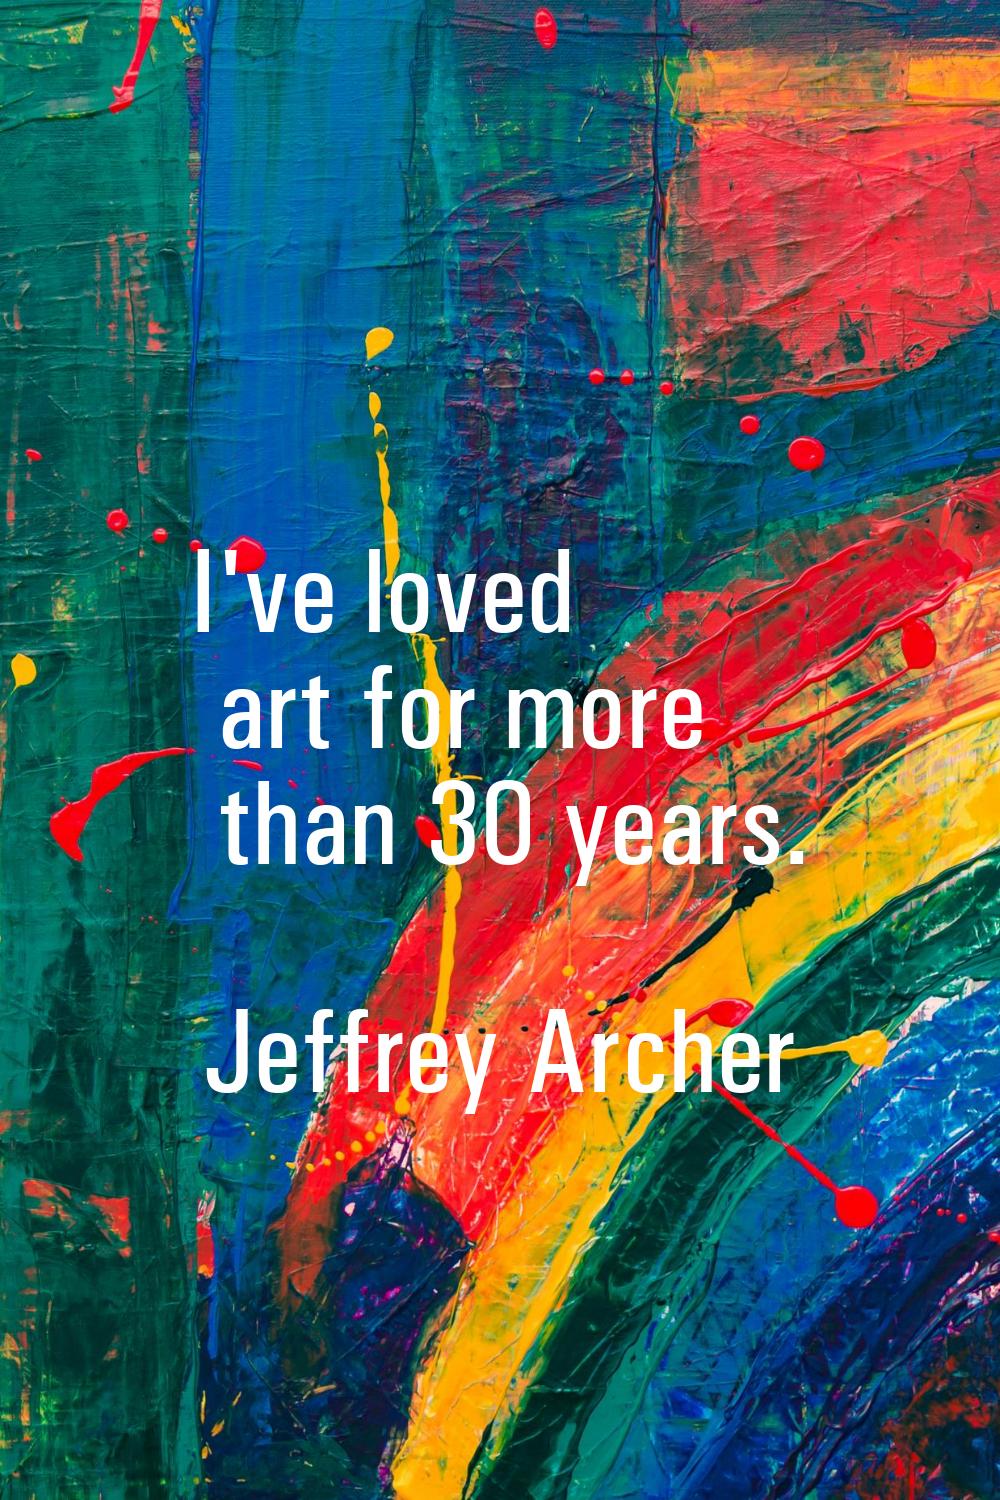 I've loved art for more than 30 years.